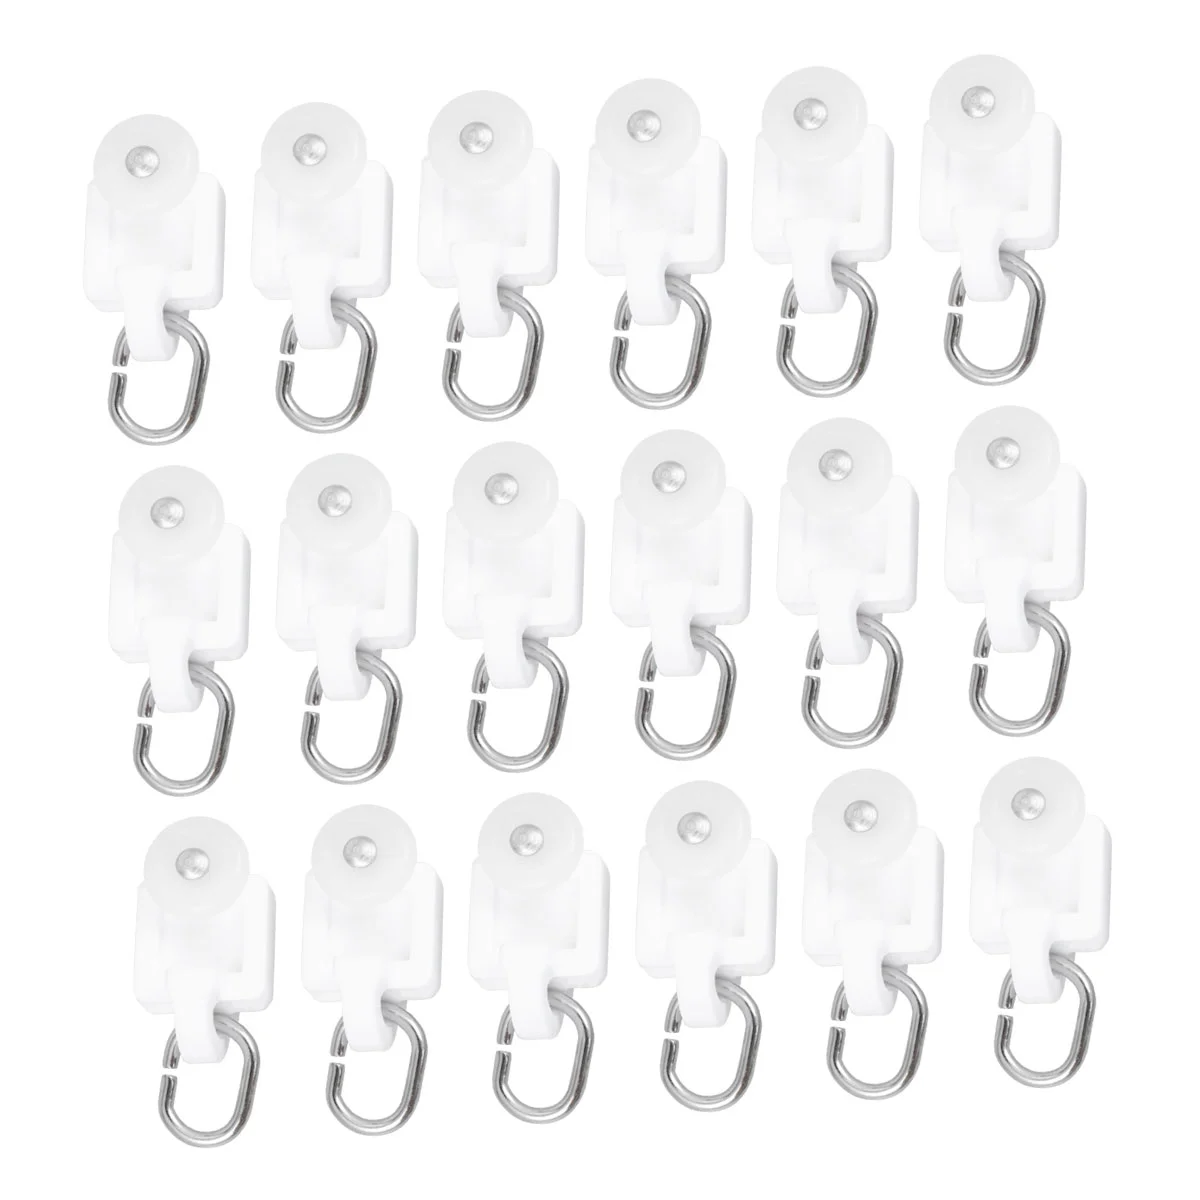 

50 PCS Arca Rail Curtain Slider Rod Curved Curtain Rod Curtain Hook Roller Flexible Track Bendable Curtain Track Pulley Glider